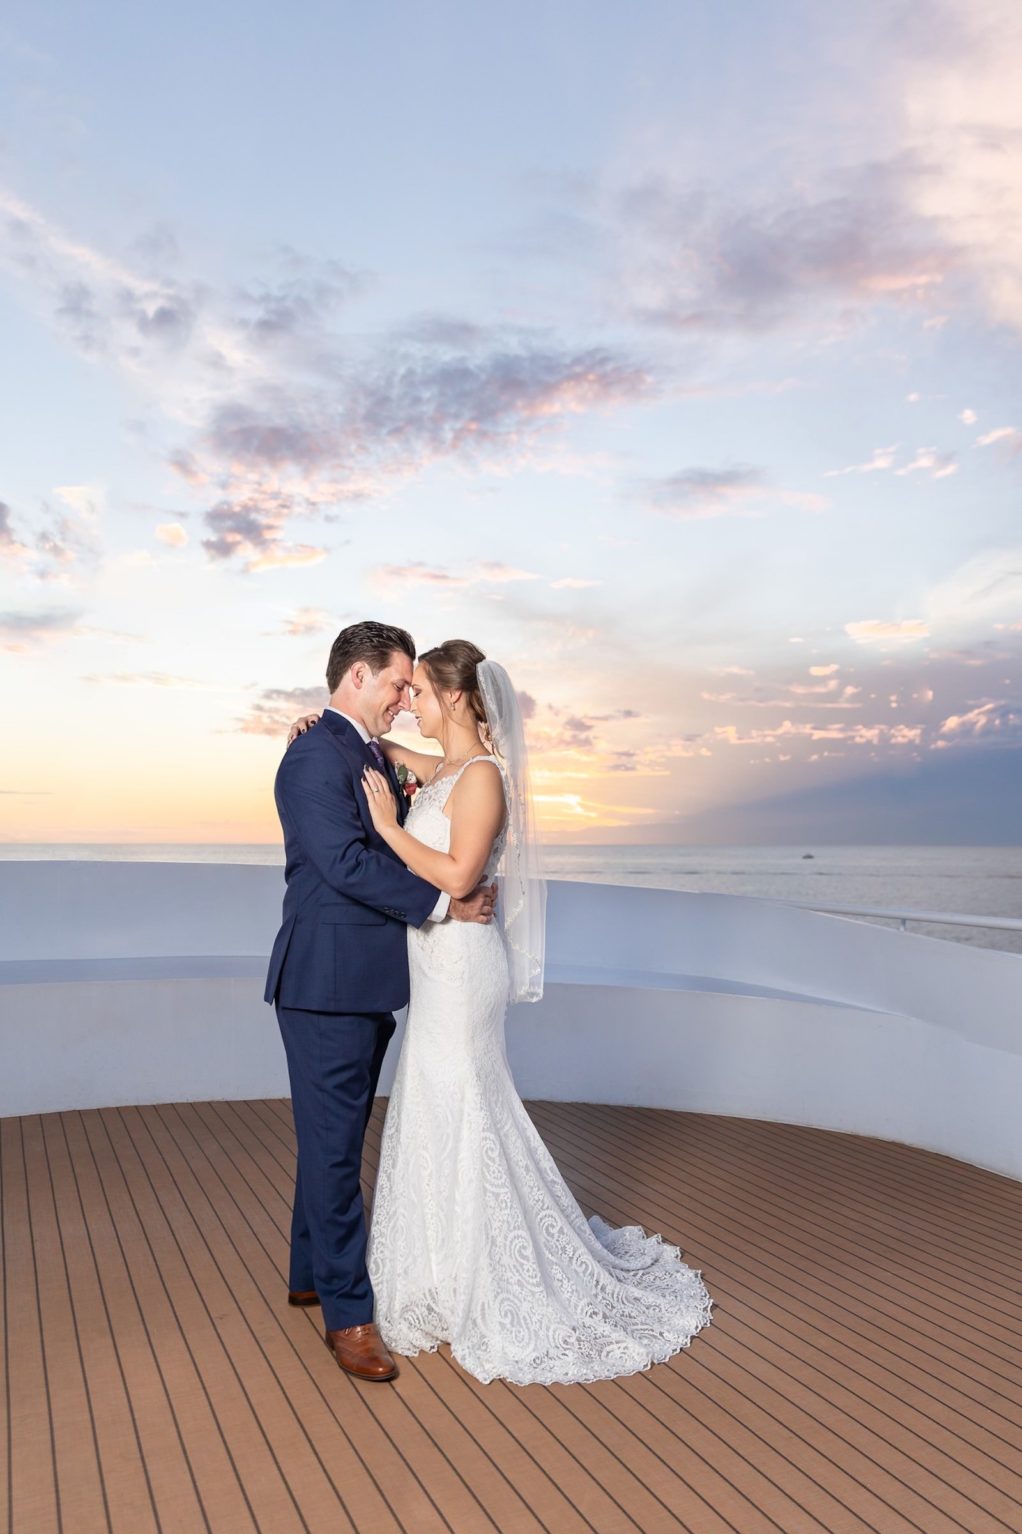 Bride and Groom Sunset Wedding Portrait | Tampa Florida Nautical Wedding Venue | Yacht StarShip Clearwater